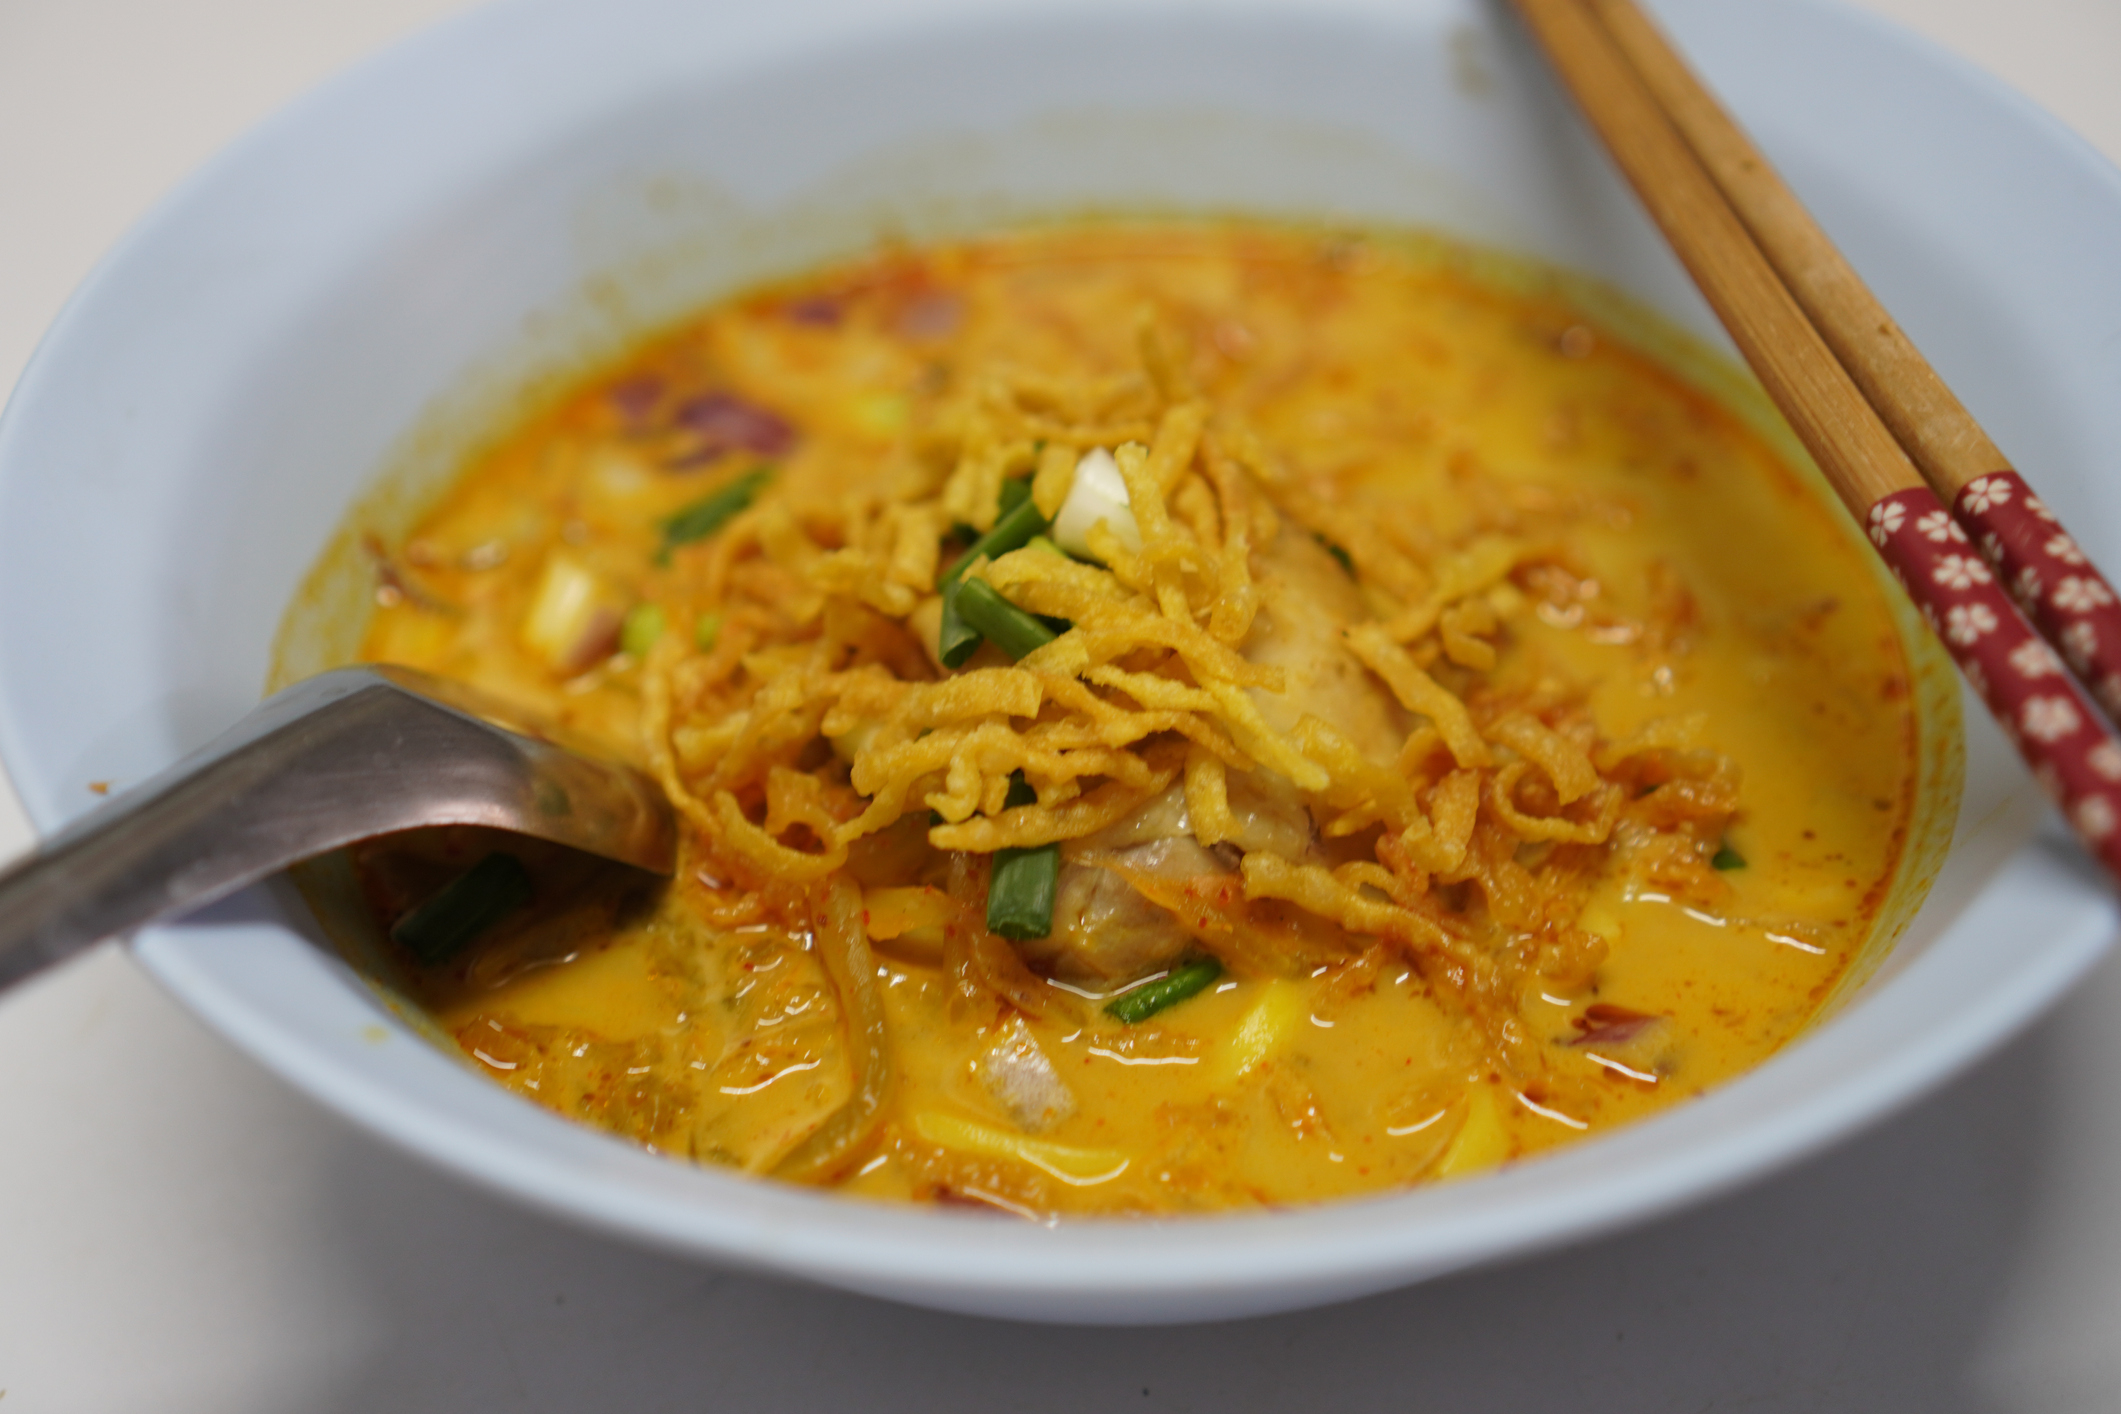 A bowl of khao soi with spoon and chopsticks, featuring noodles and green onions